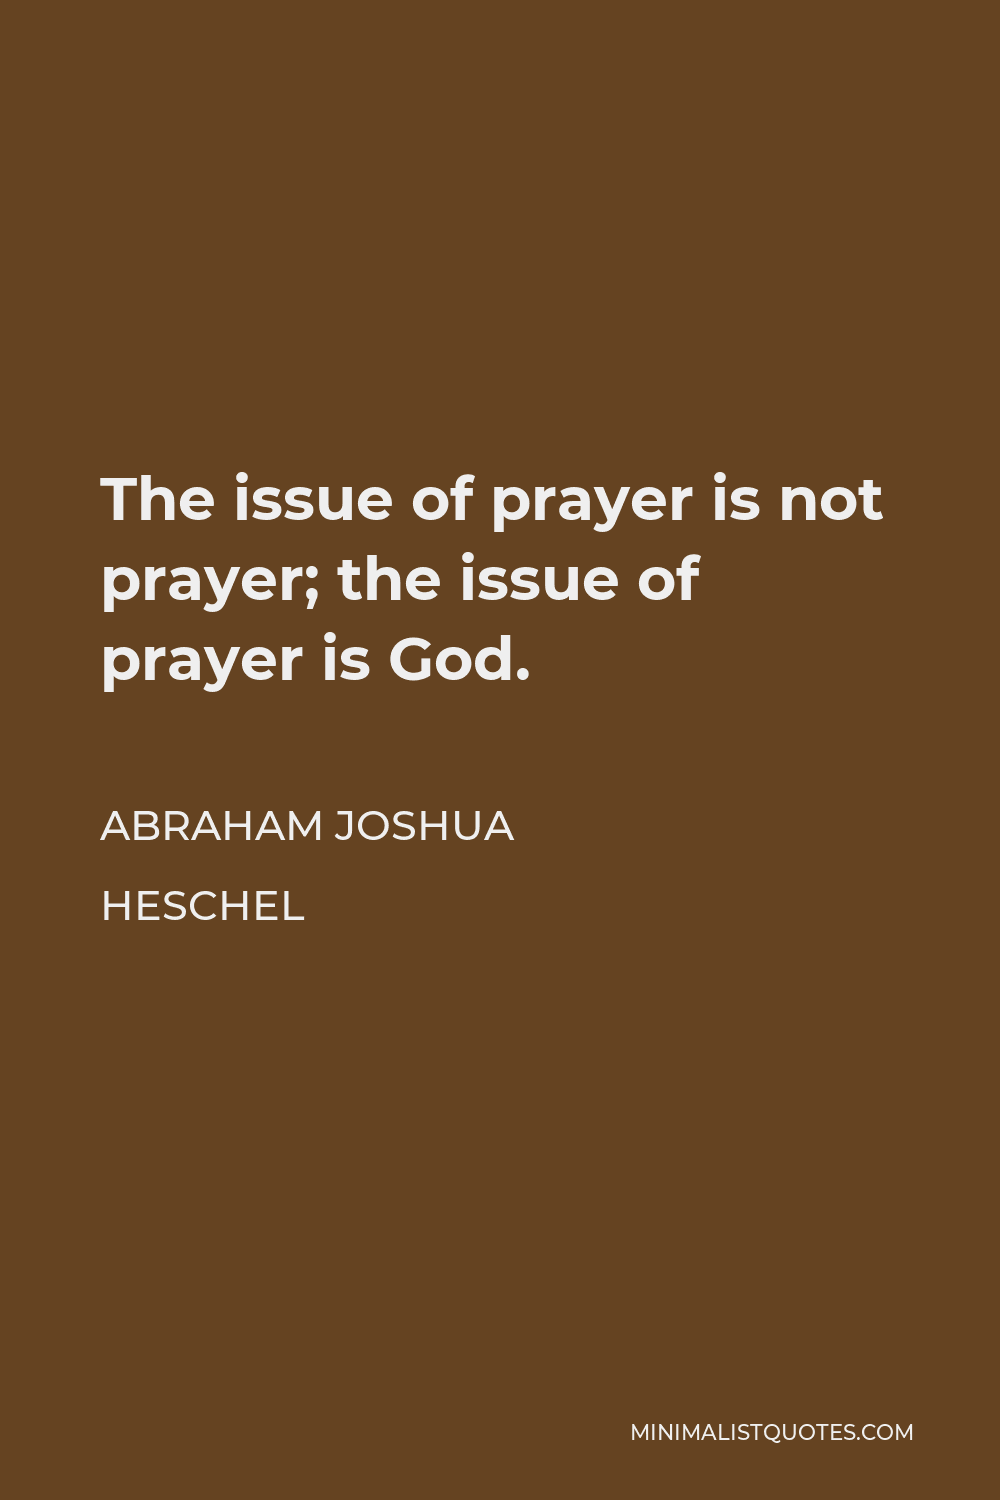 Abraham Joshua Heschel Quote - The issue of prayer is not prayer; the issue of prayer is God. One cannot pray unless he has faith in his own ability to accost the infinite, merciful, eternal God.